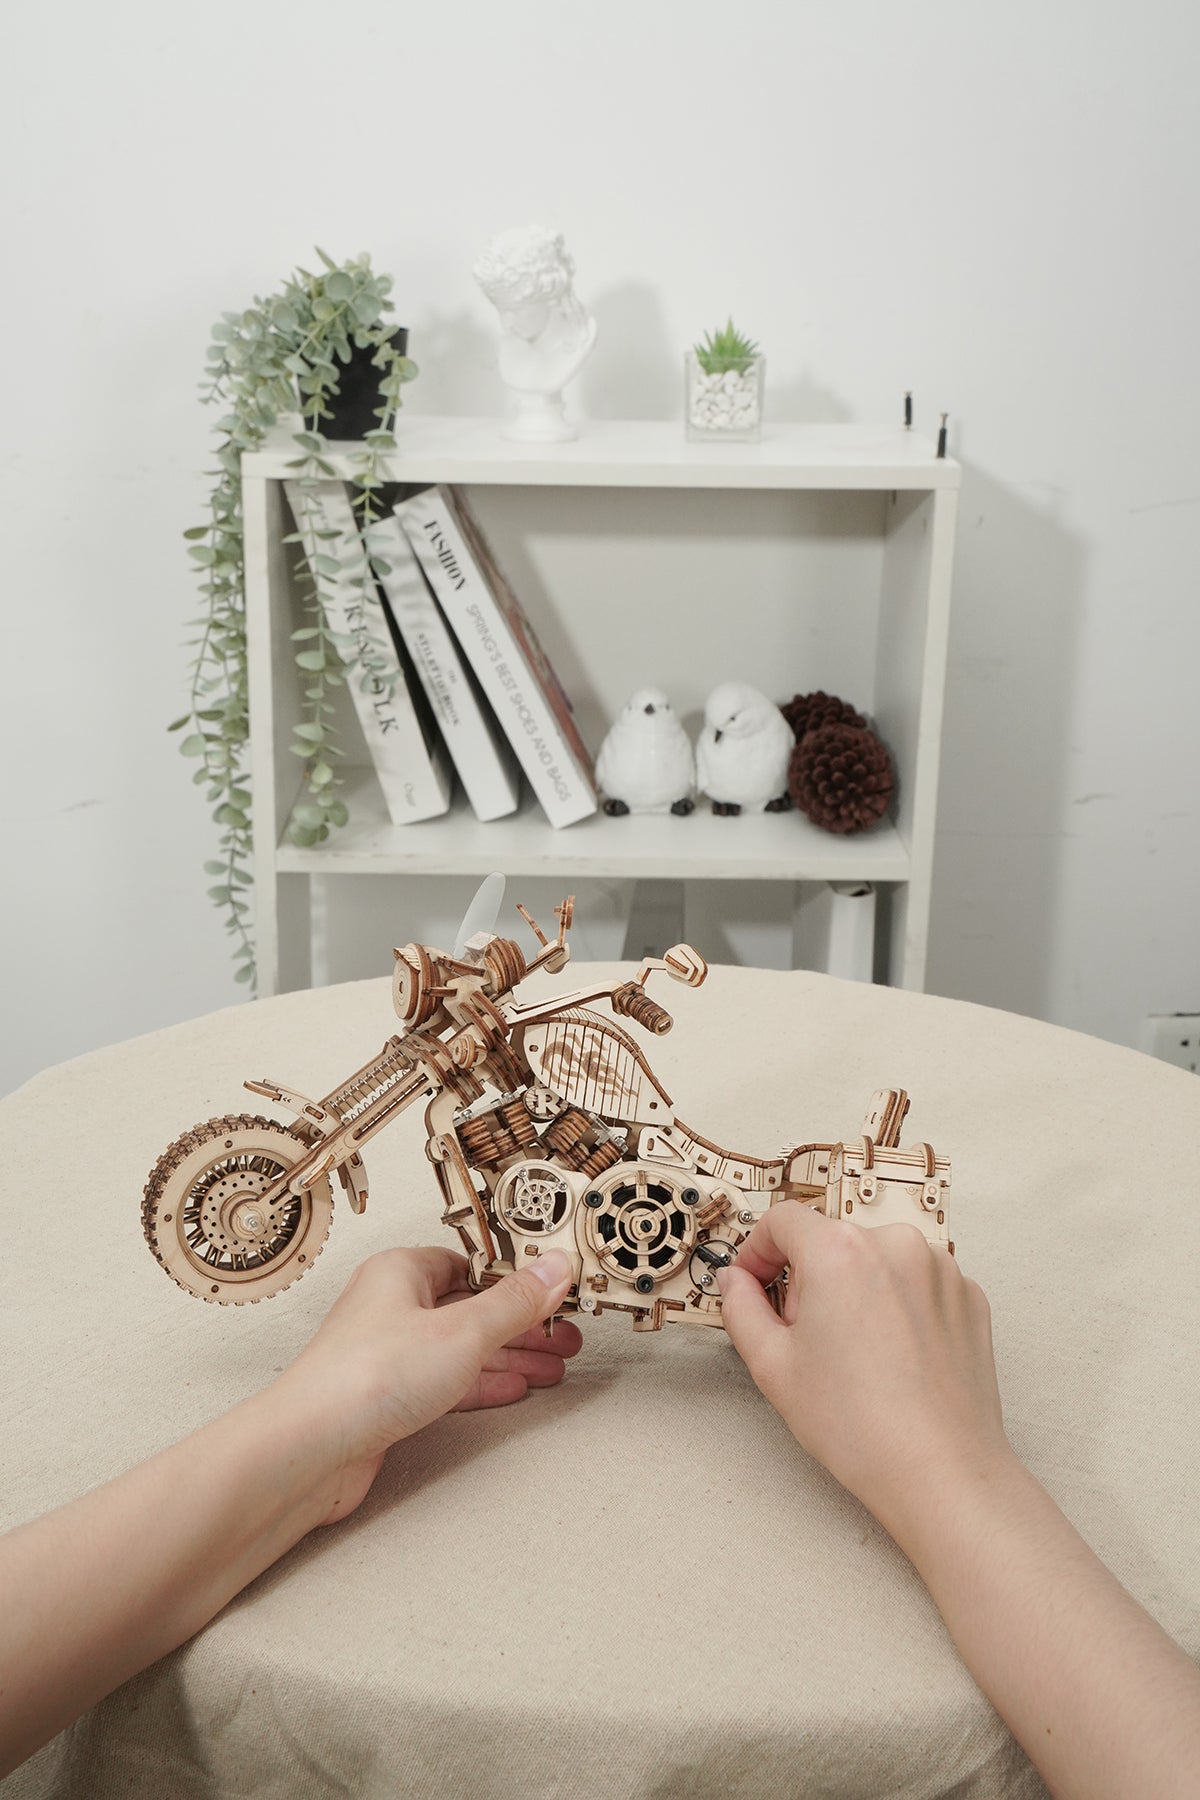 ROKR Cruiser motorcycle LK504 3D Wooden Puzzle